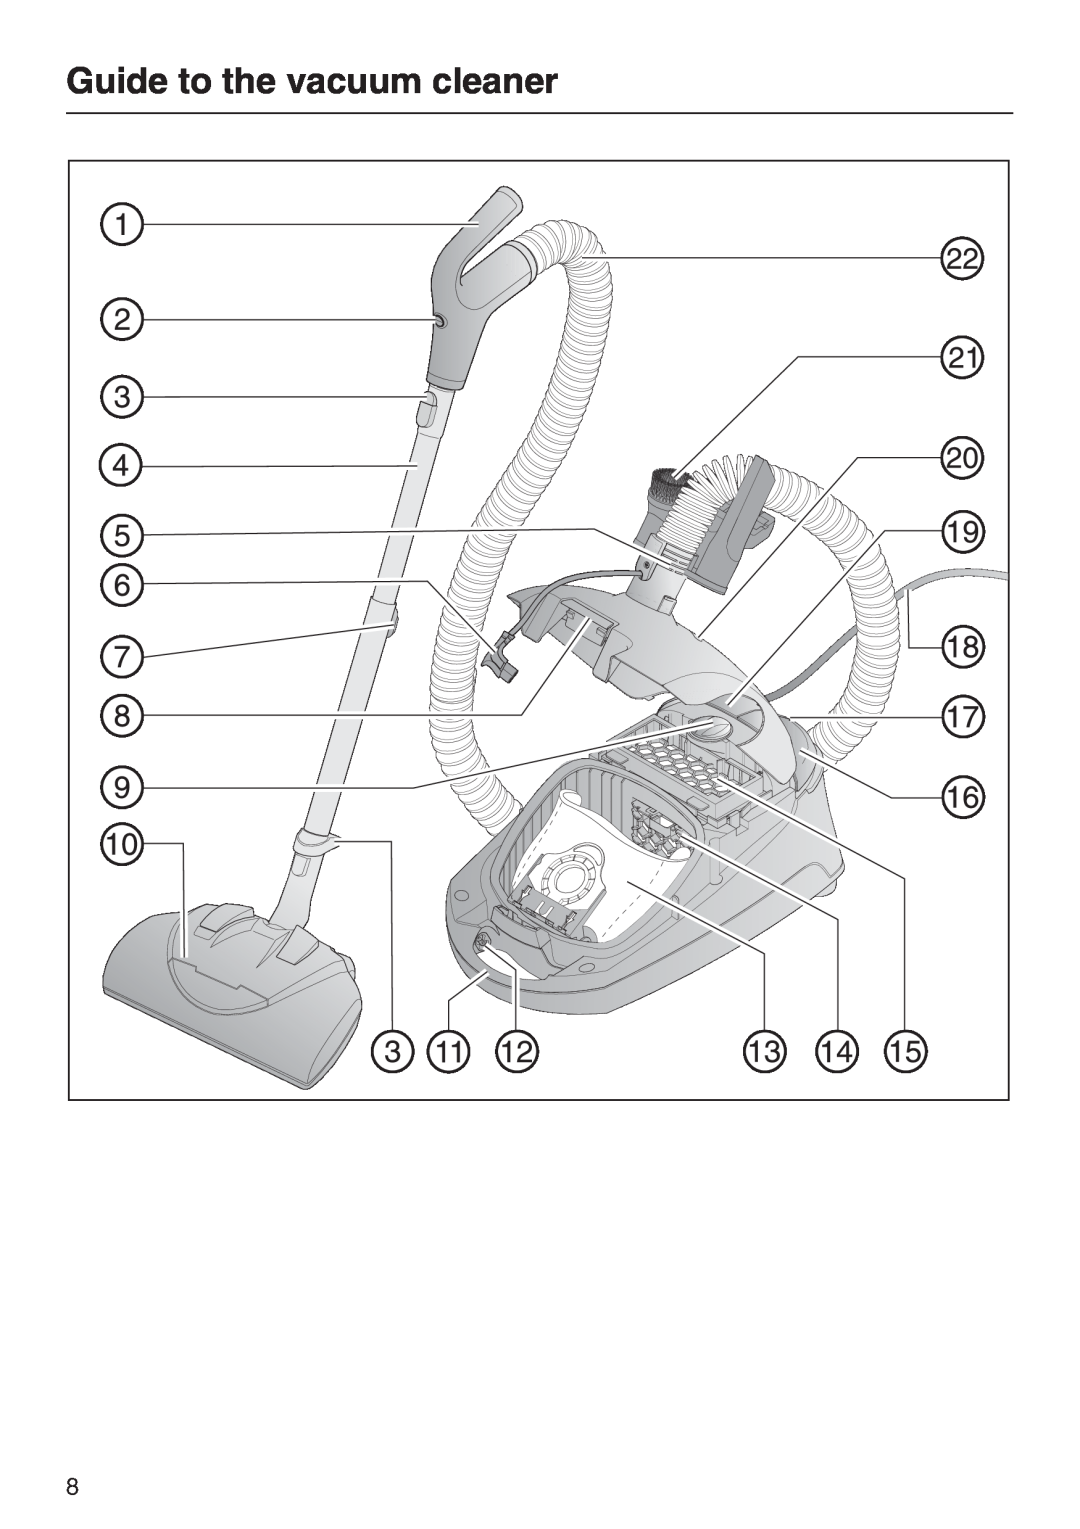 Miele S 2001 manual Guide to the vacuum cleaner 